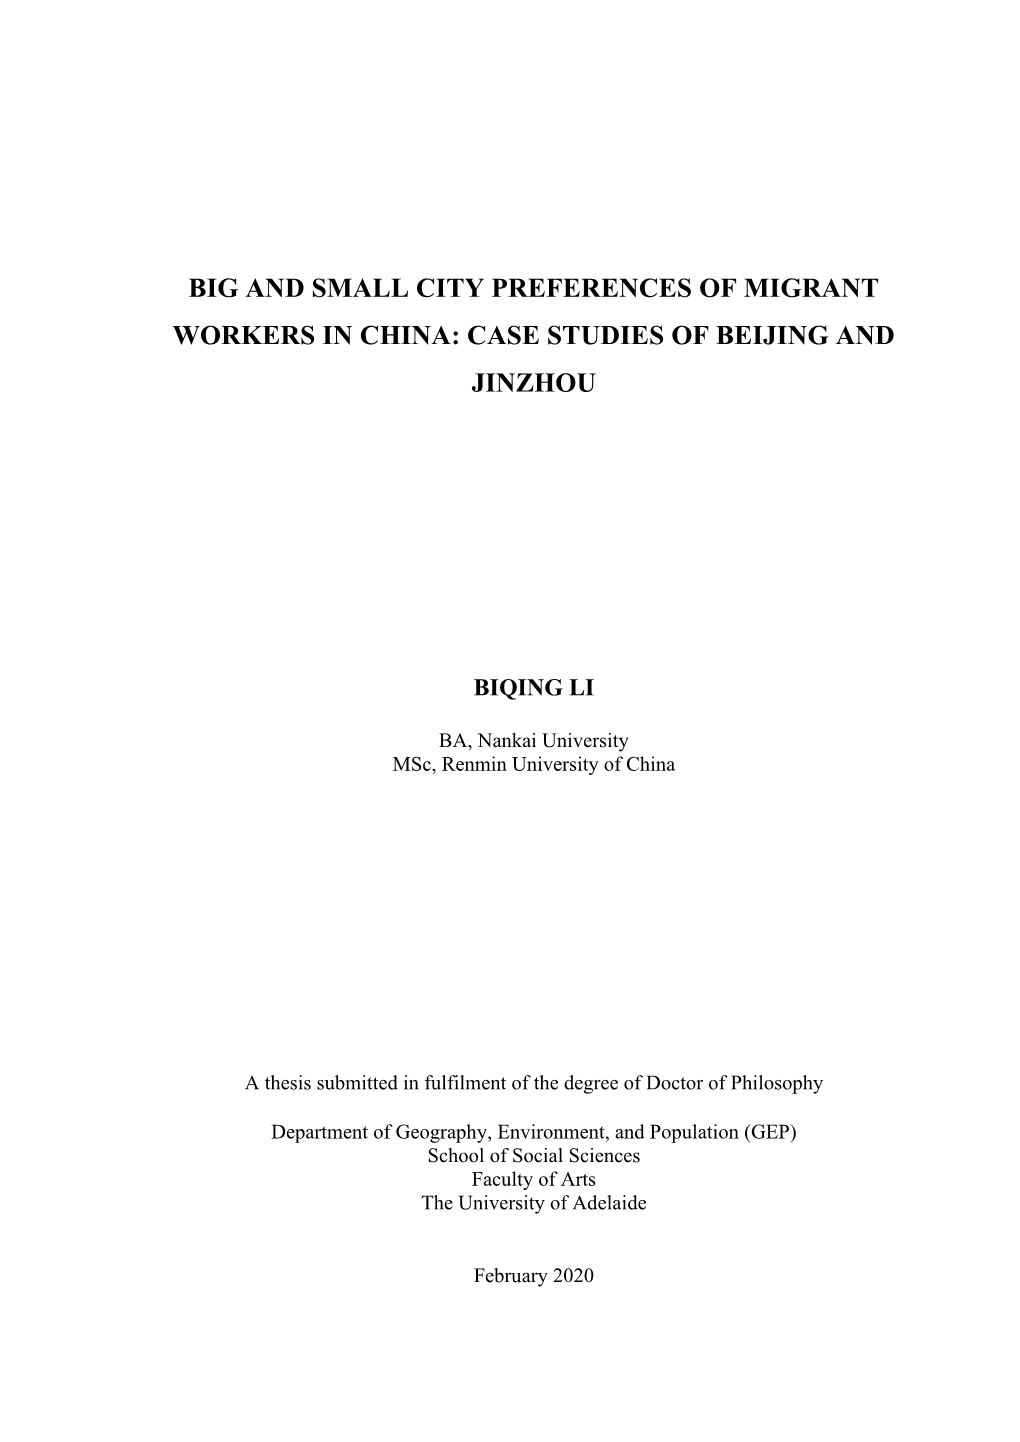 Big and Small City Preferences of Migrant Workers in China: Case Studies of Beijing and Jinzhou